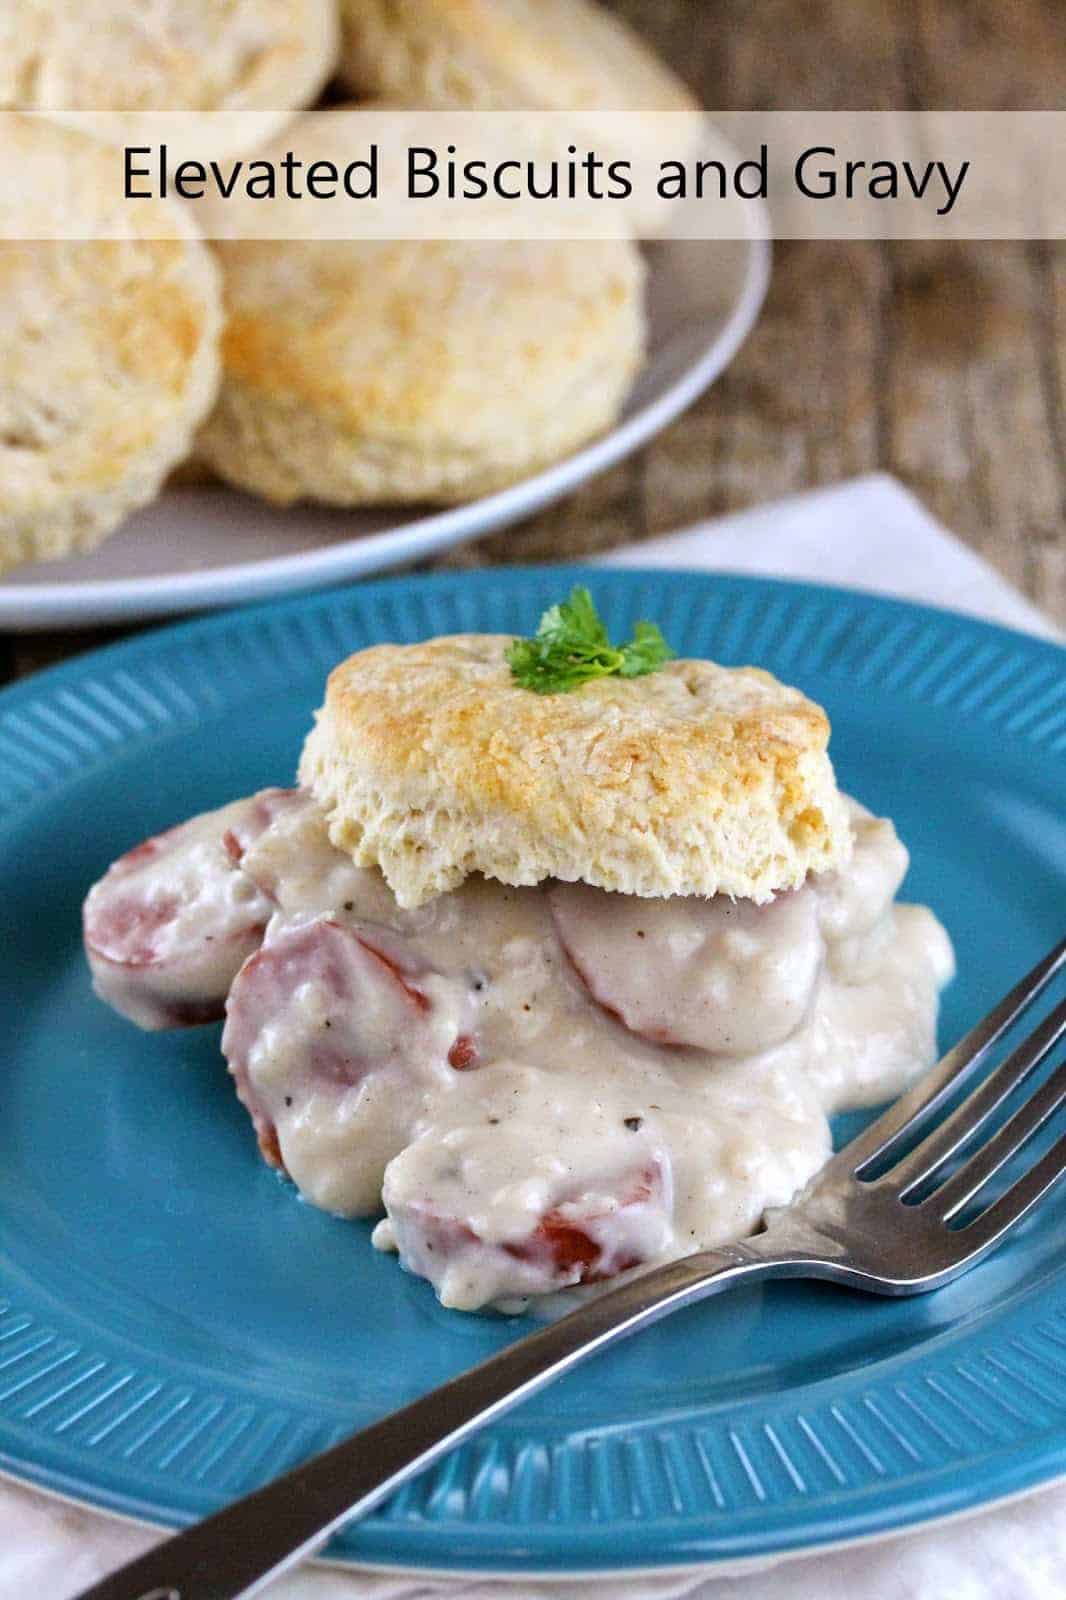 biscuits and gravy with Italian sausage and mushrooms